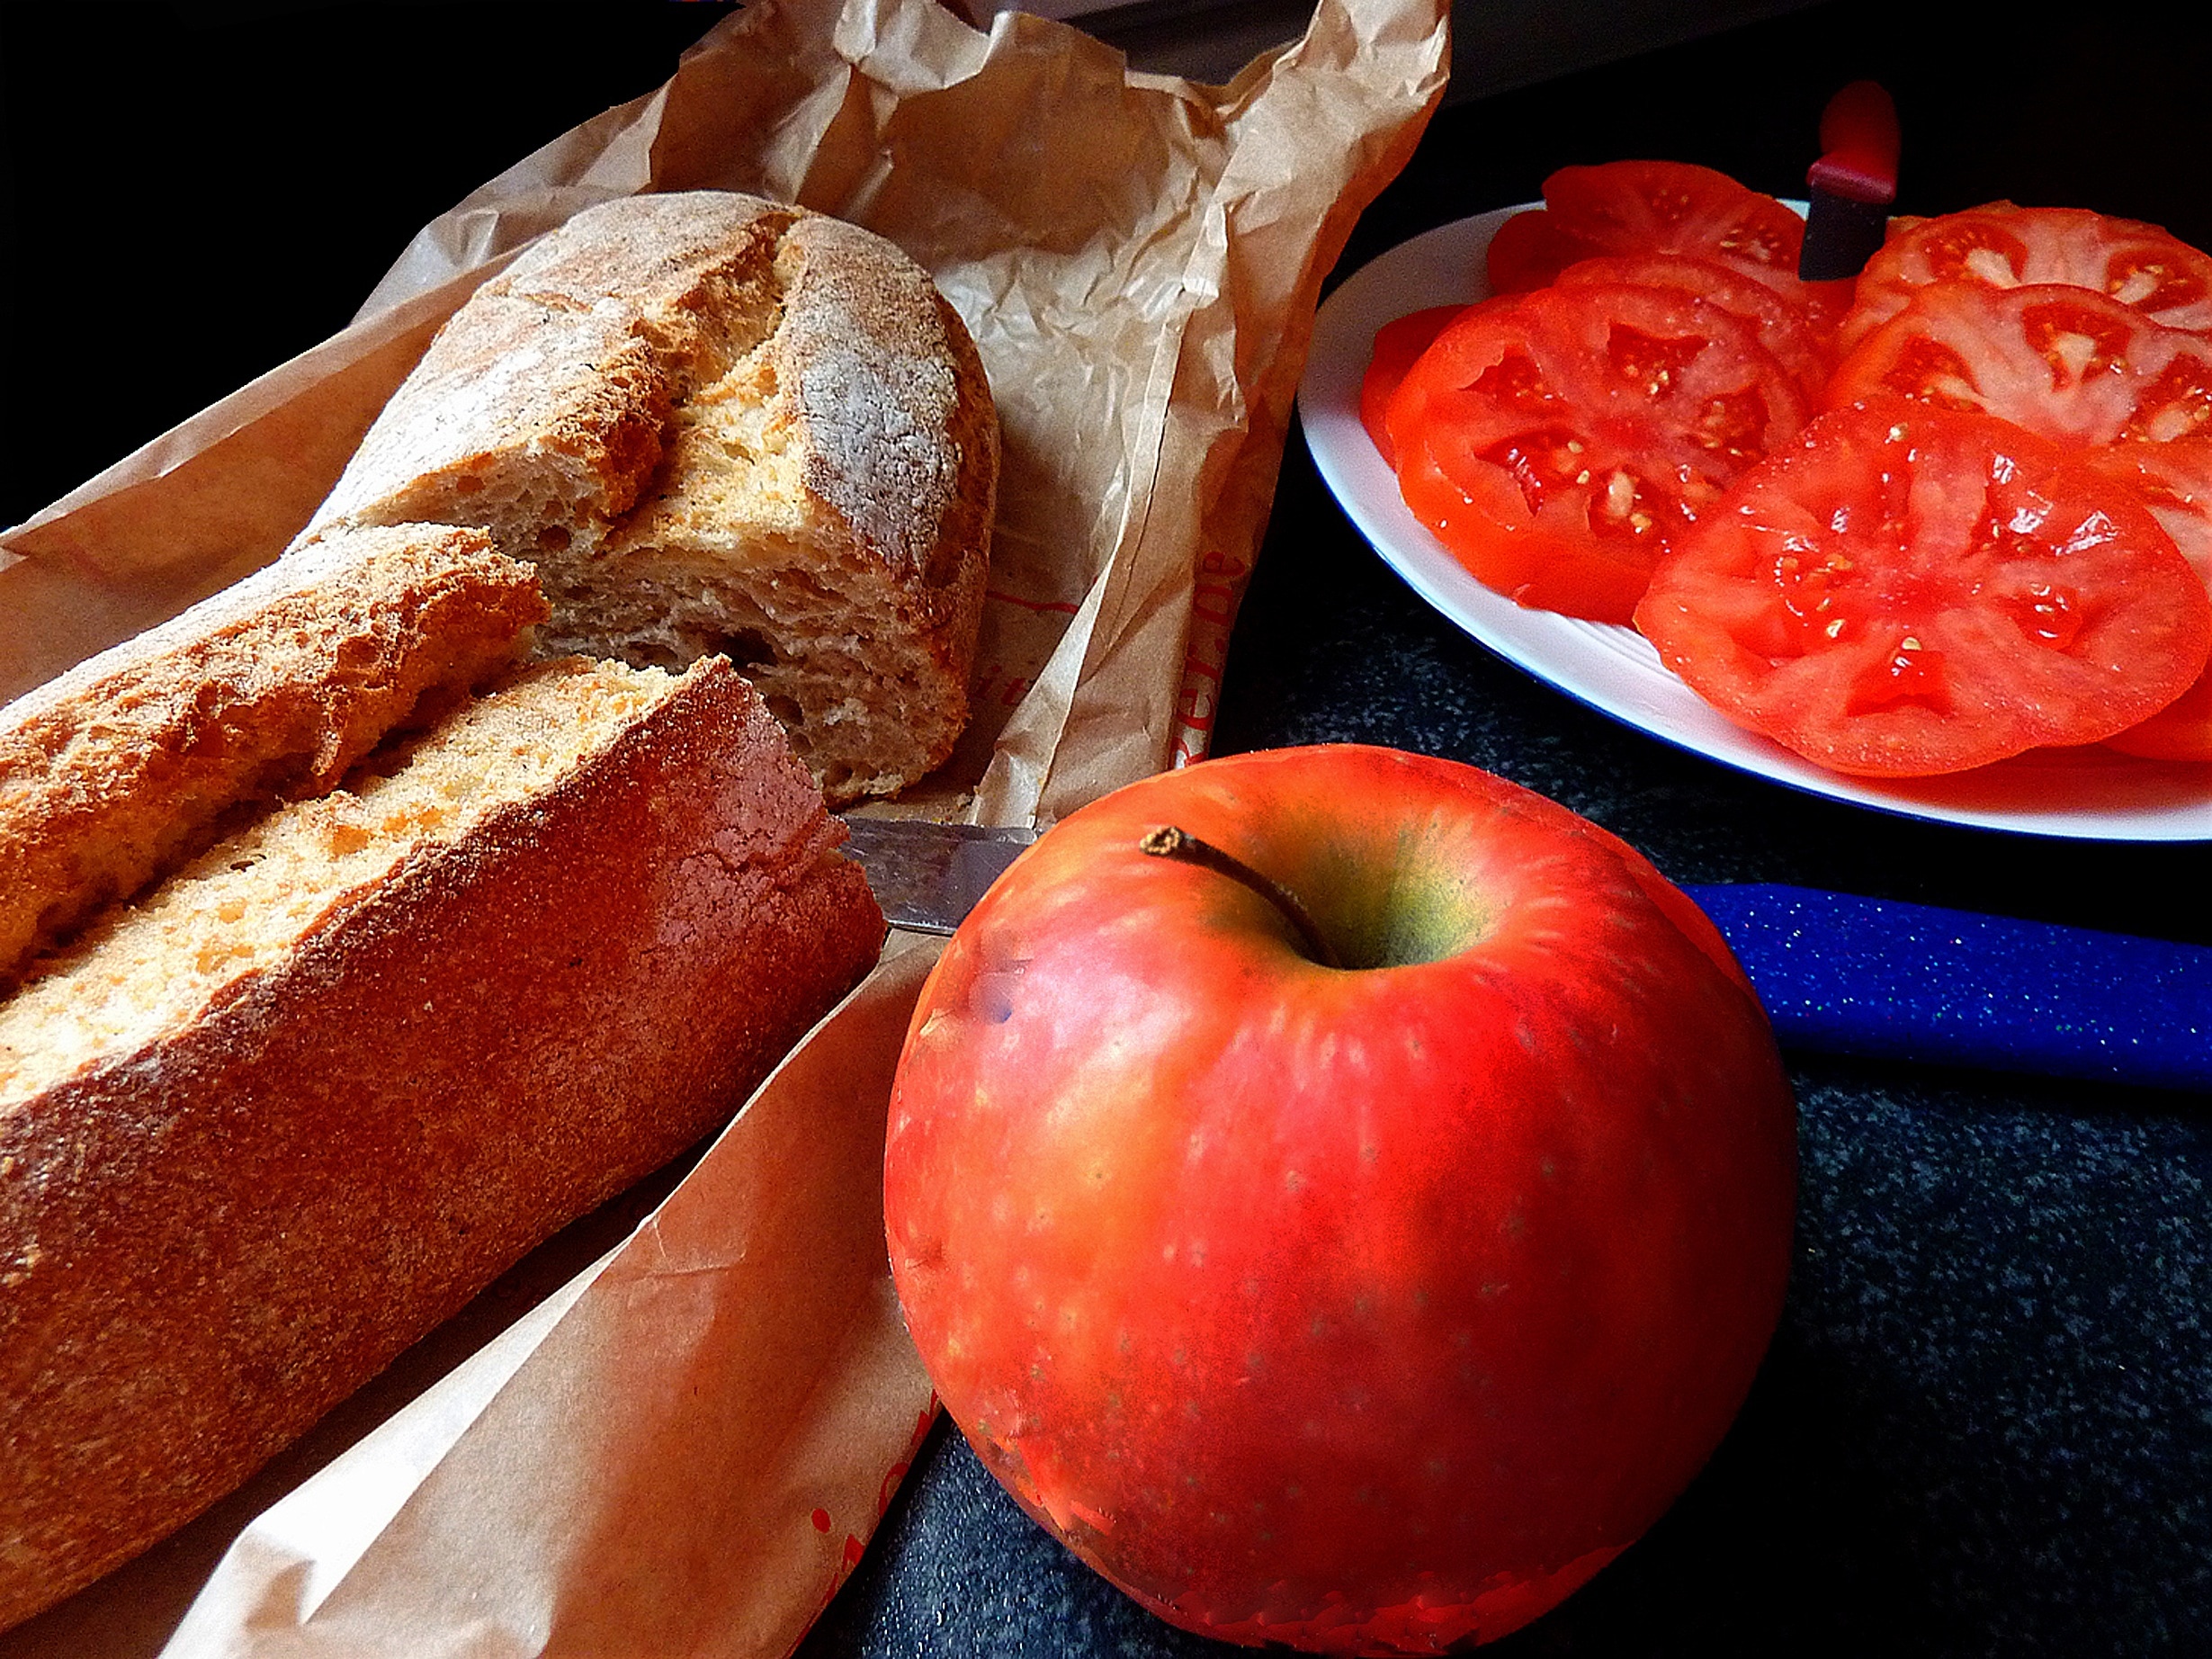 bread, apple and sliced tomatoes